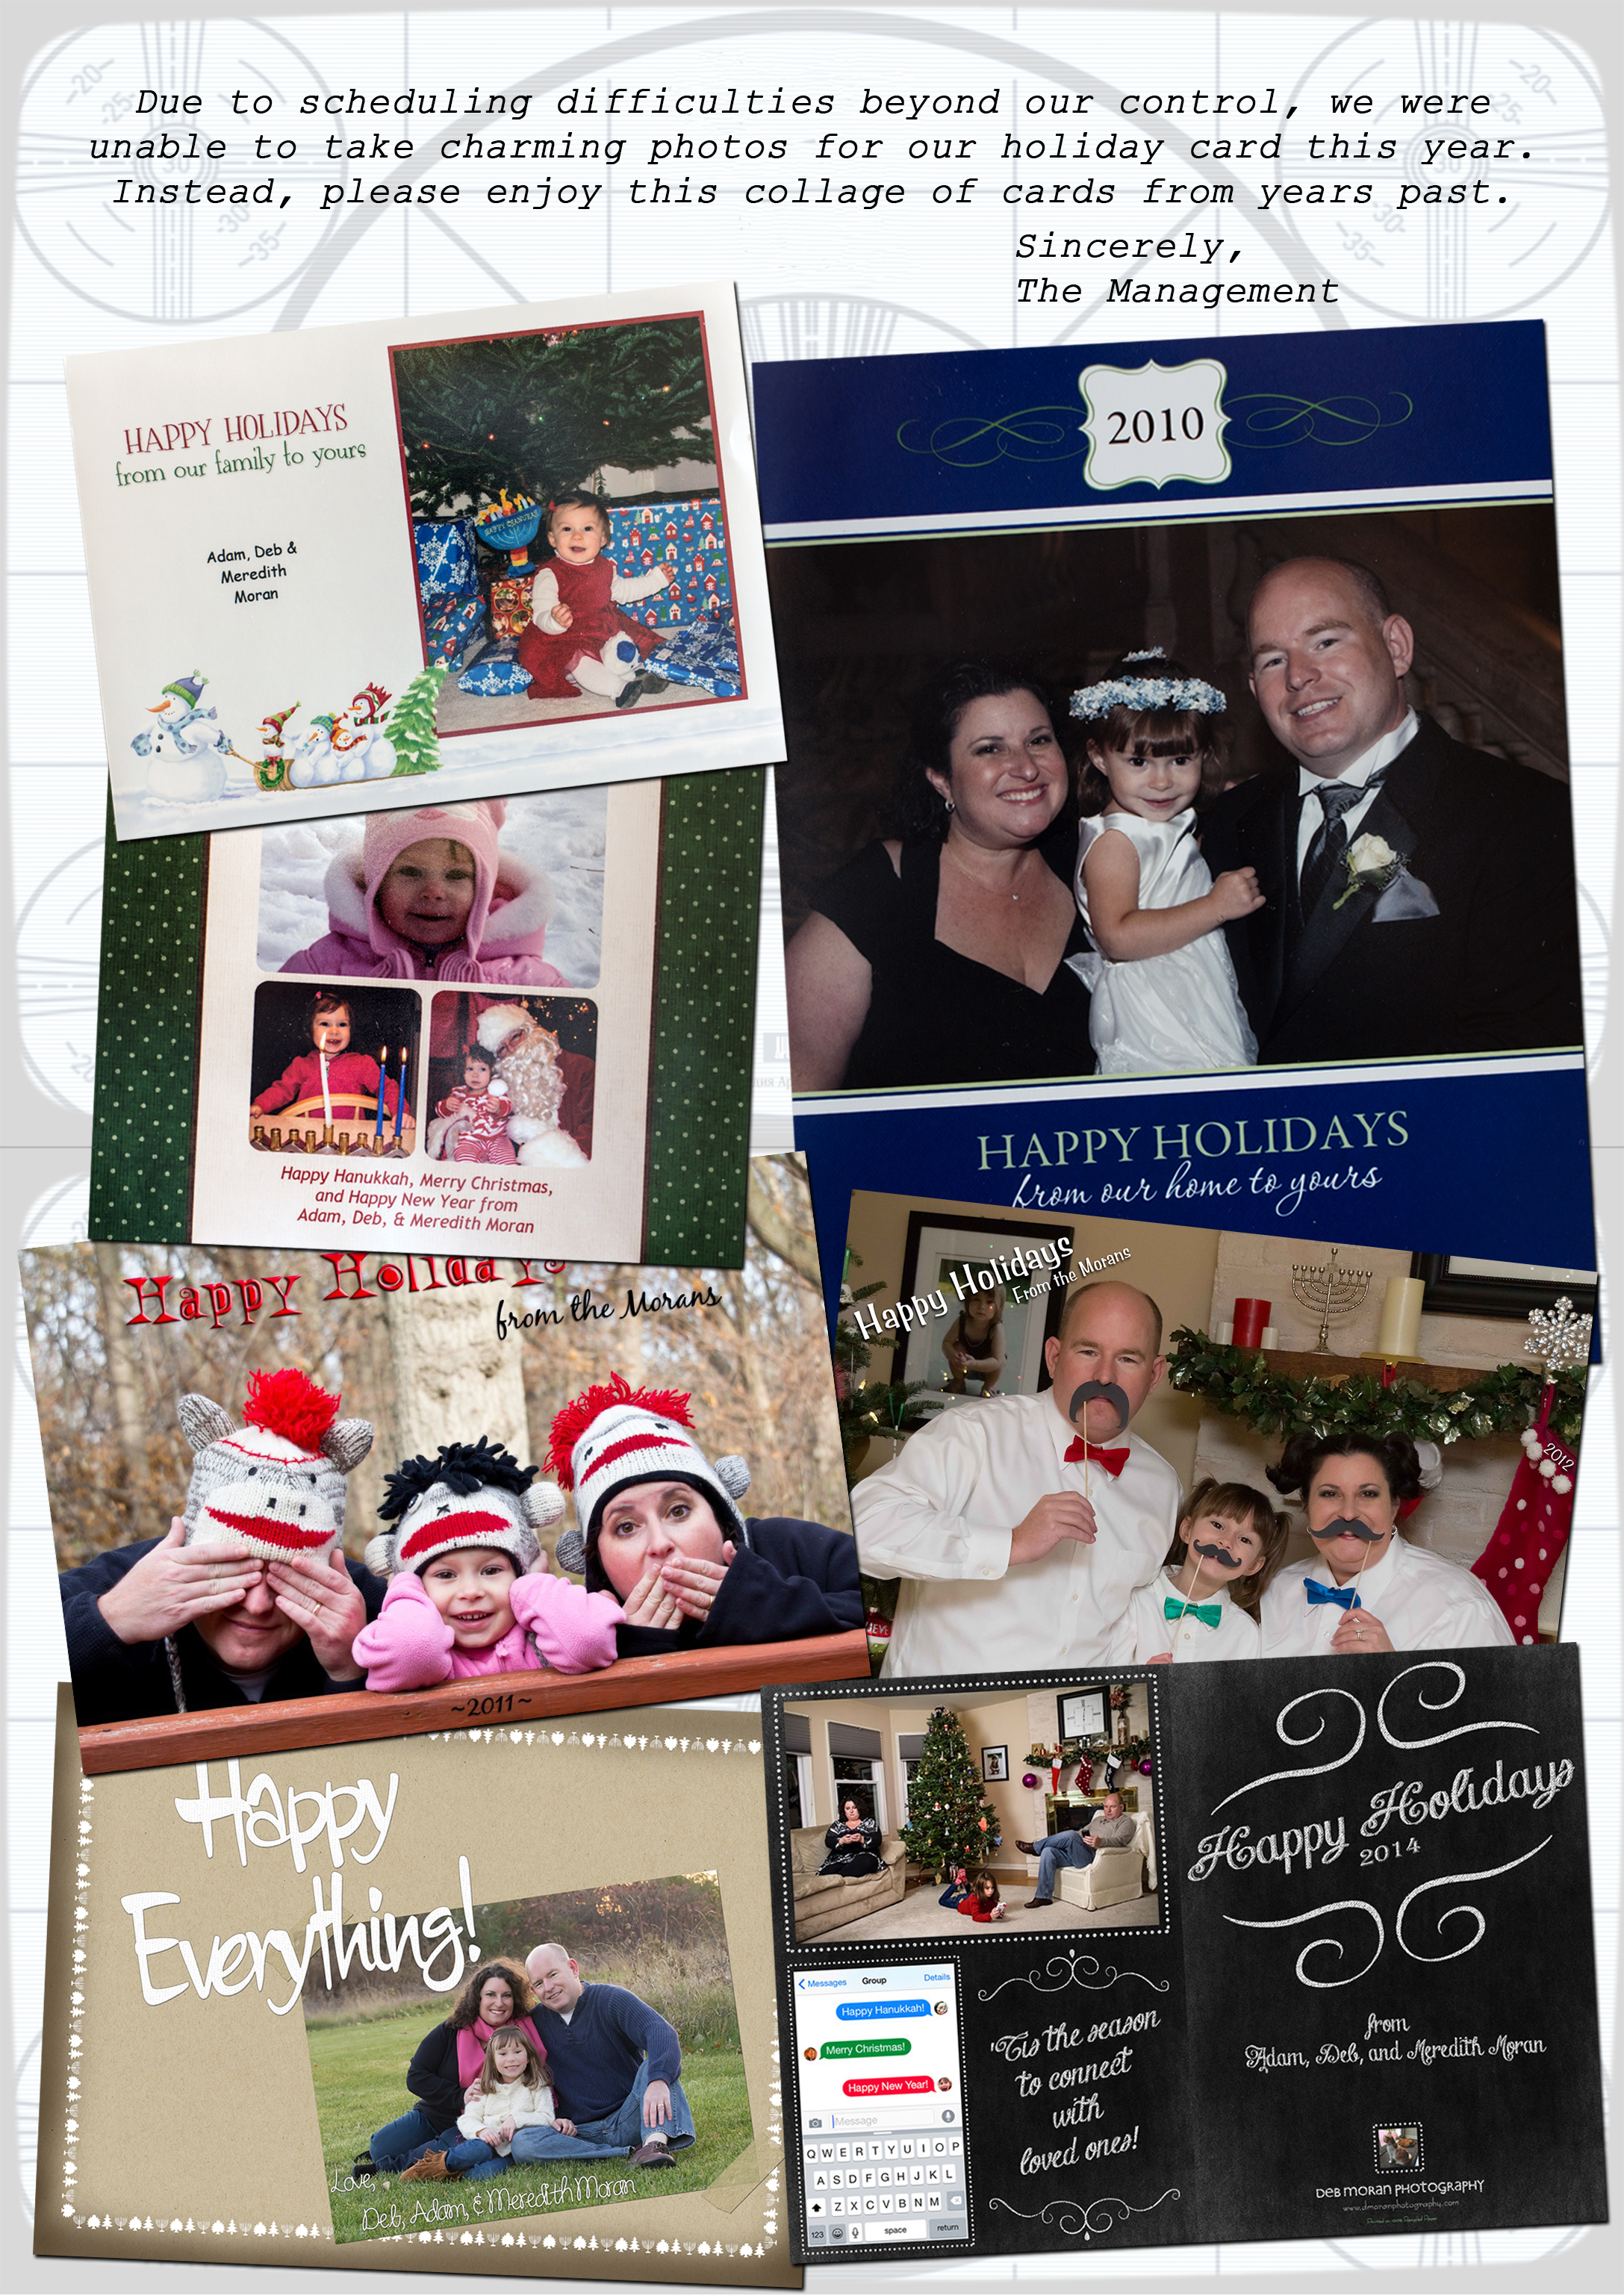 The inside of our holiday card for 2015